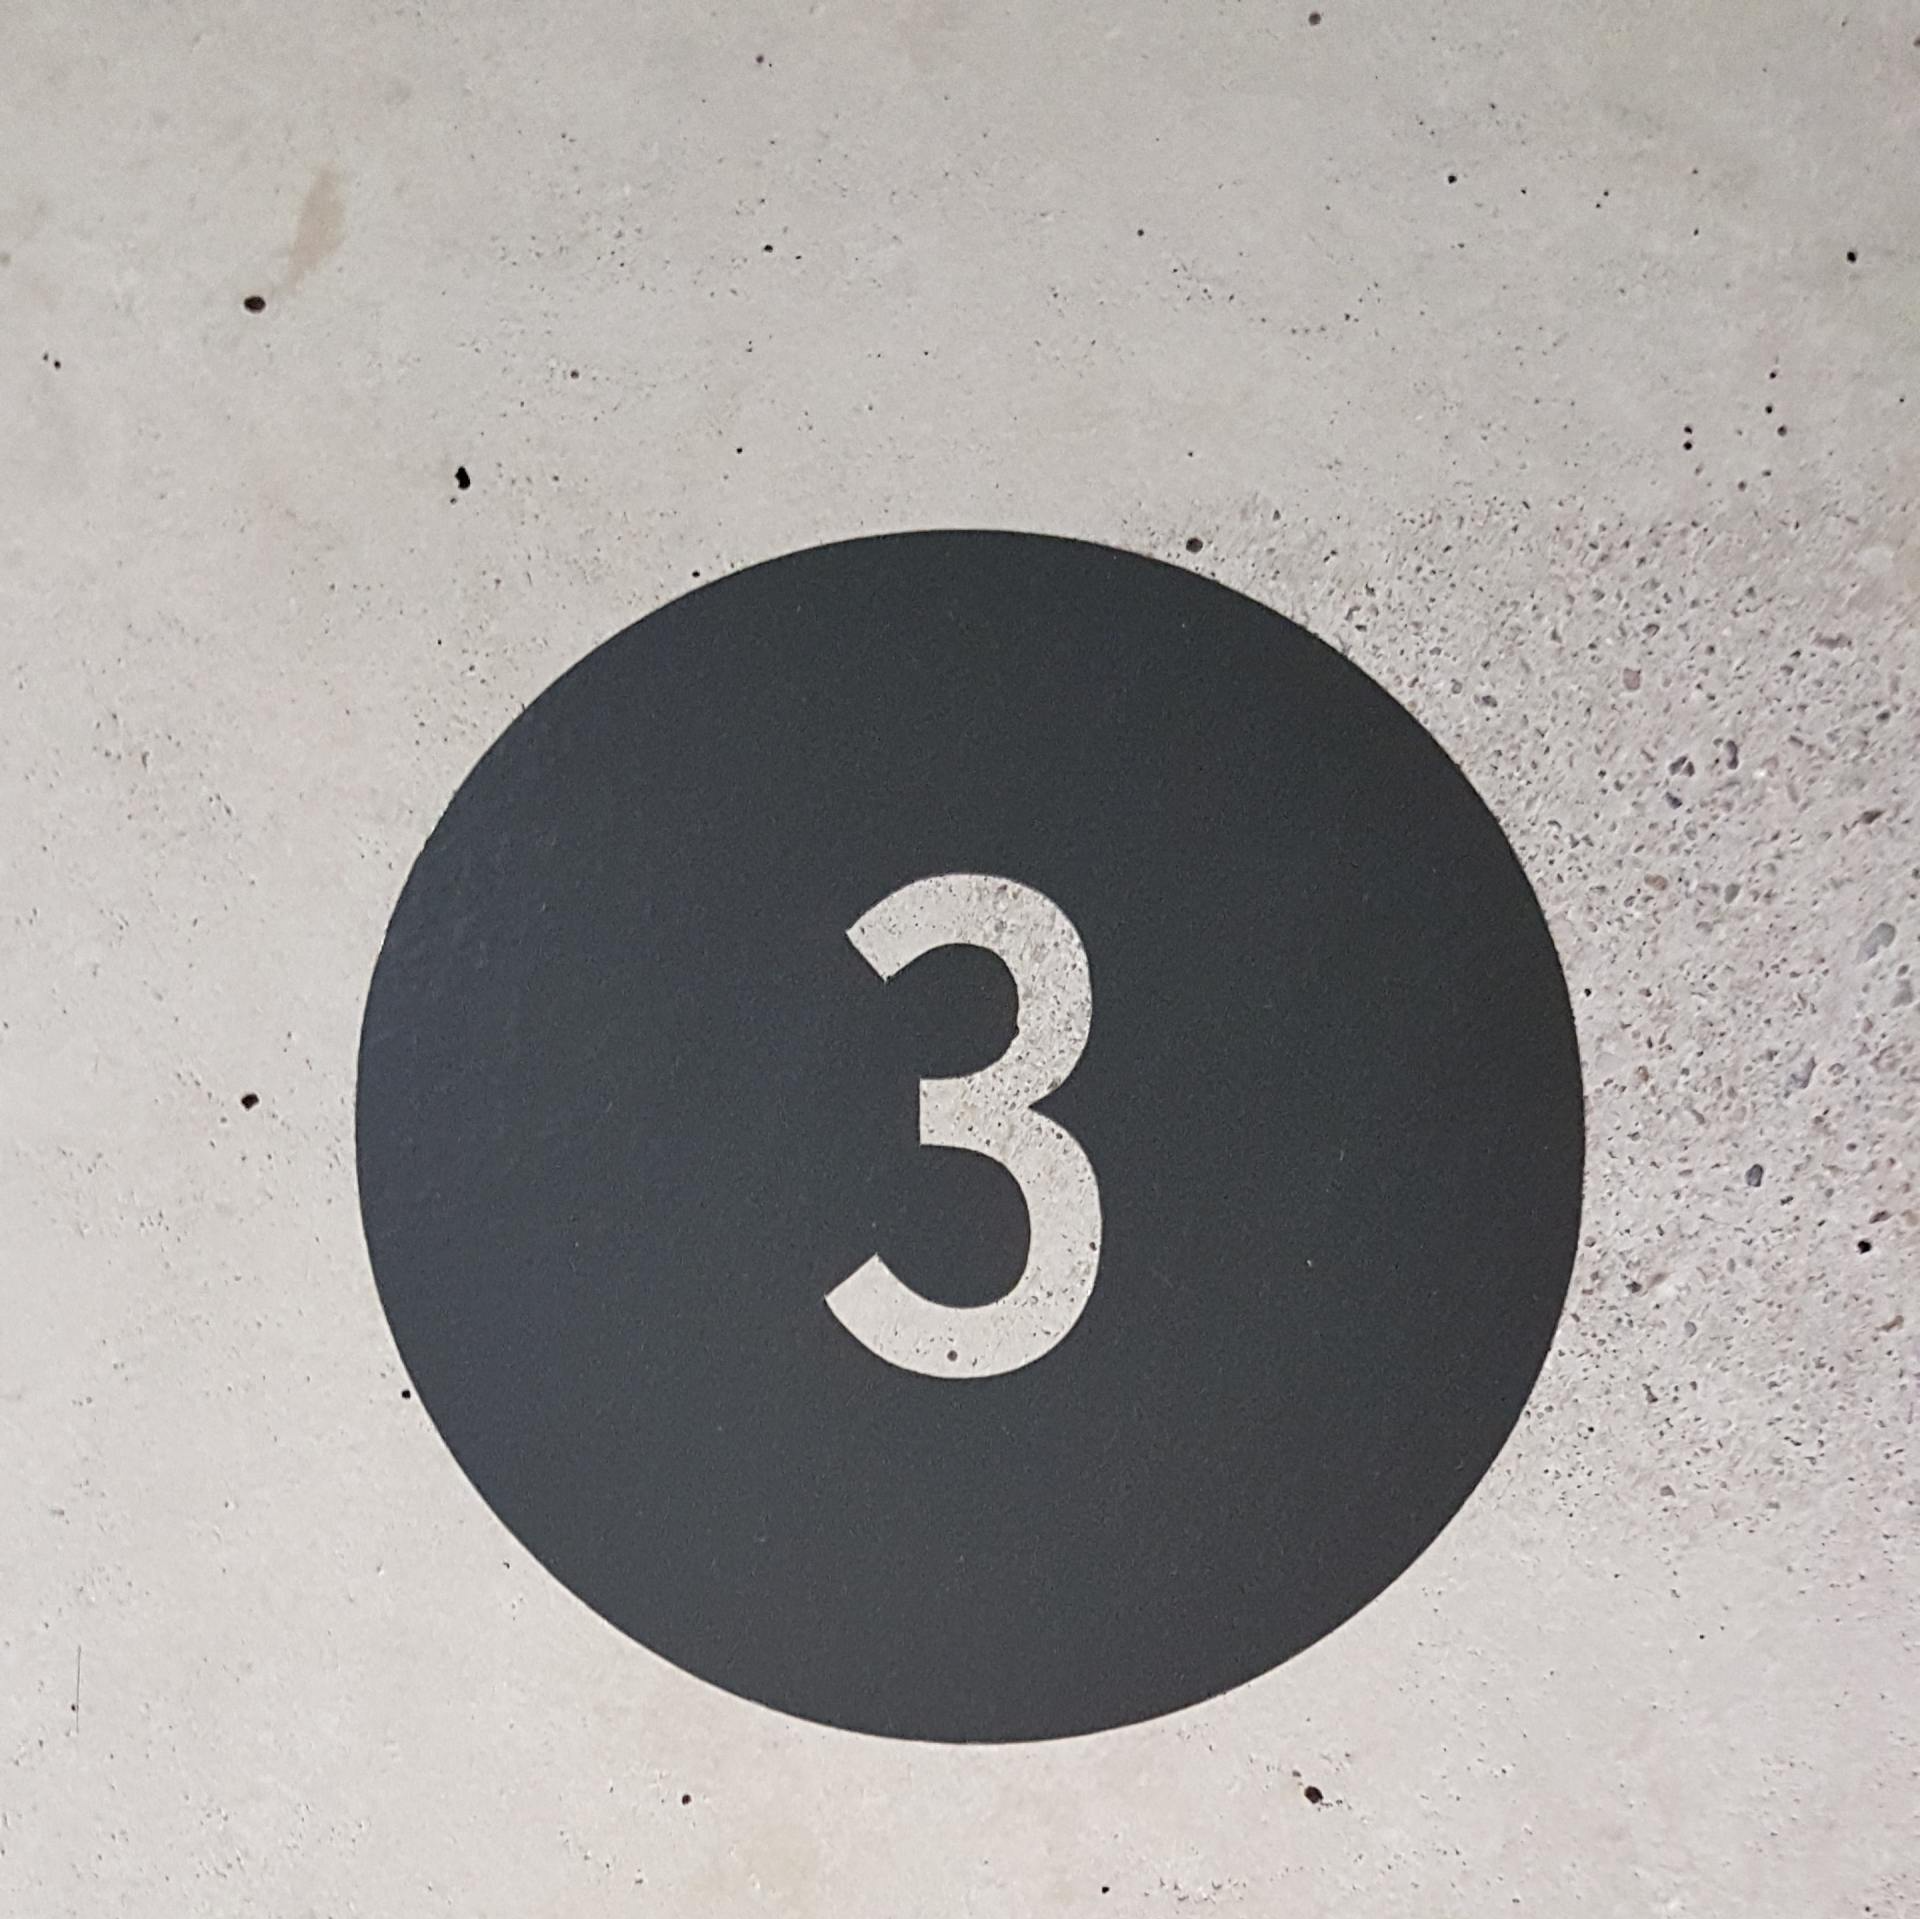 Photograph of black circle with white 3 in the centre